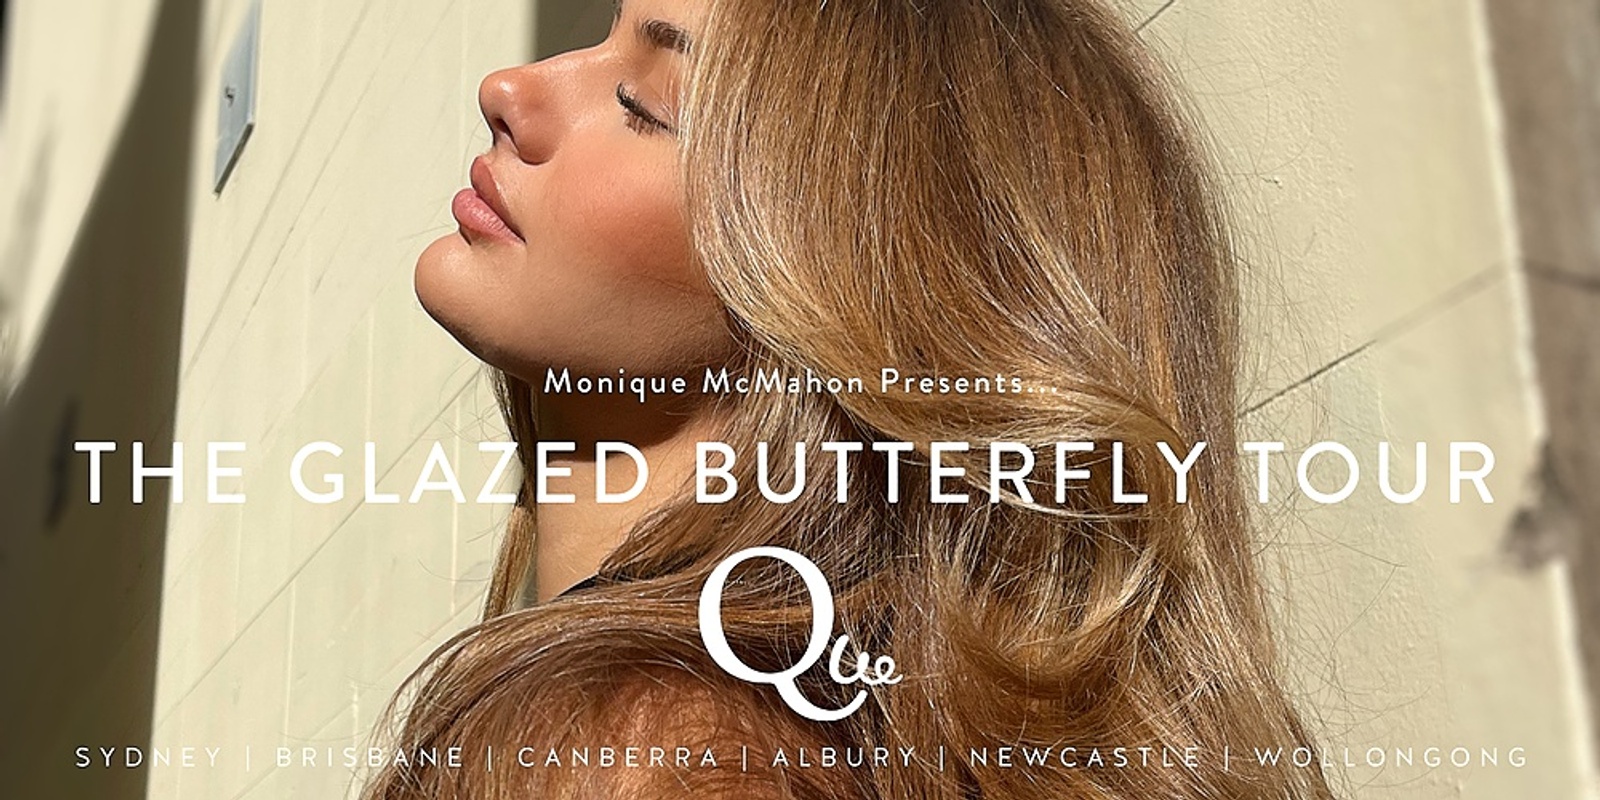 Banner image for ALBURY - Double Glazed Butterfly Tour, presented by Monique McMahon 